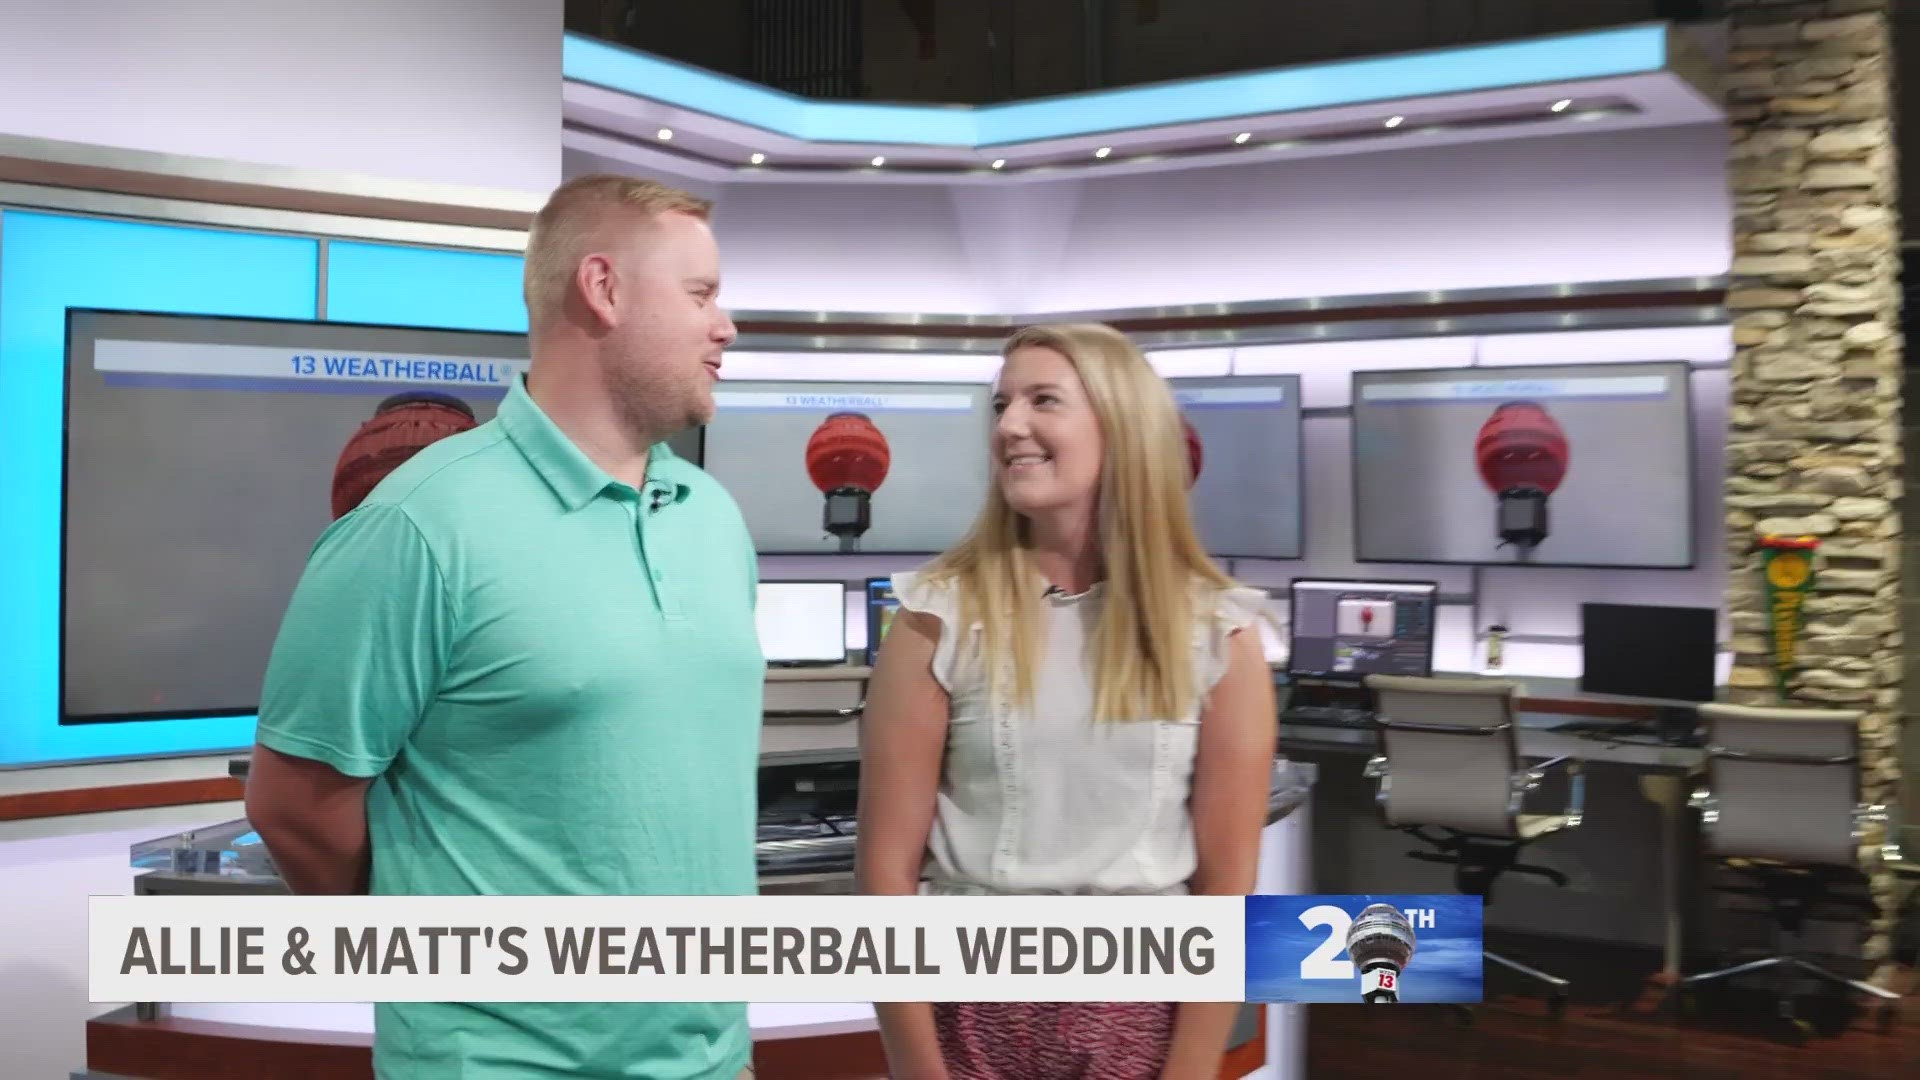 Allie and Matt bonded over the Weatherball when Matt first moved to Grand Rapids. The day before their wedding, they came to 13 ON YOUR SIDE to change the colors.